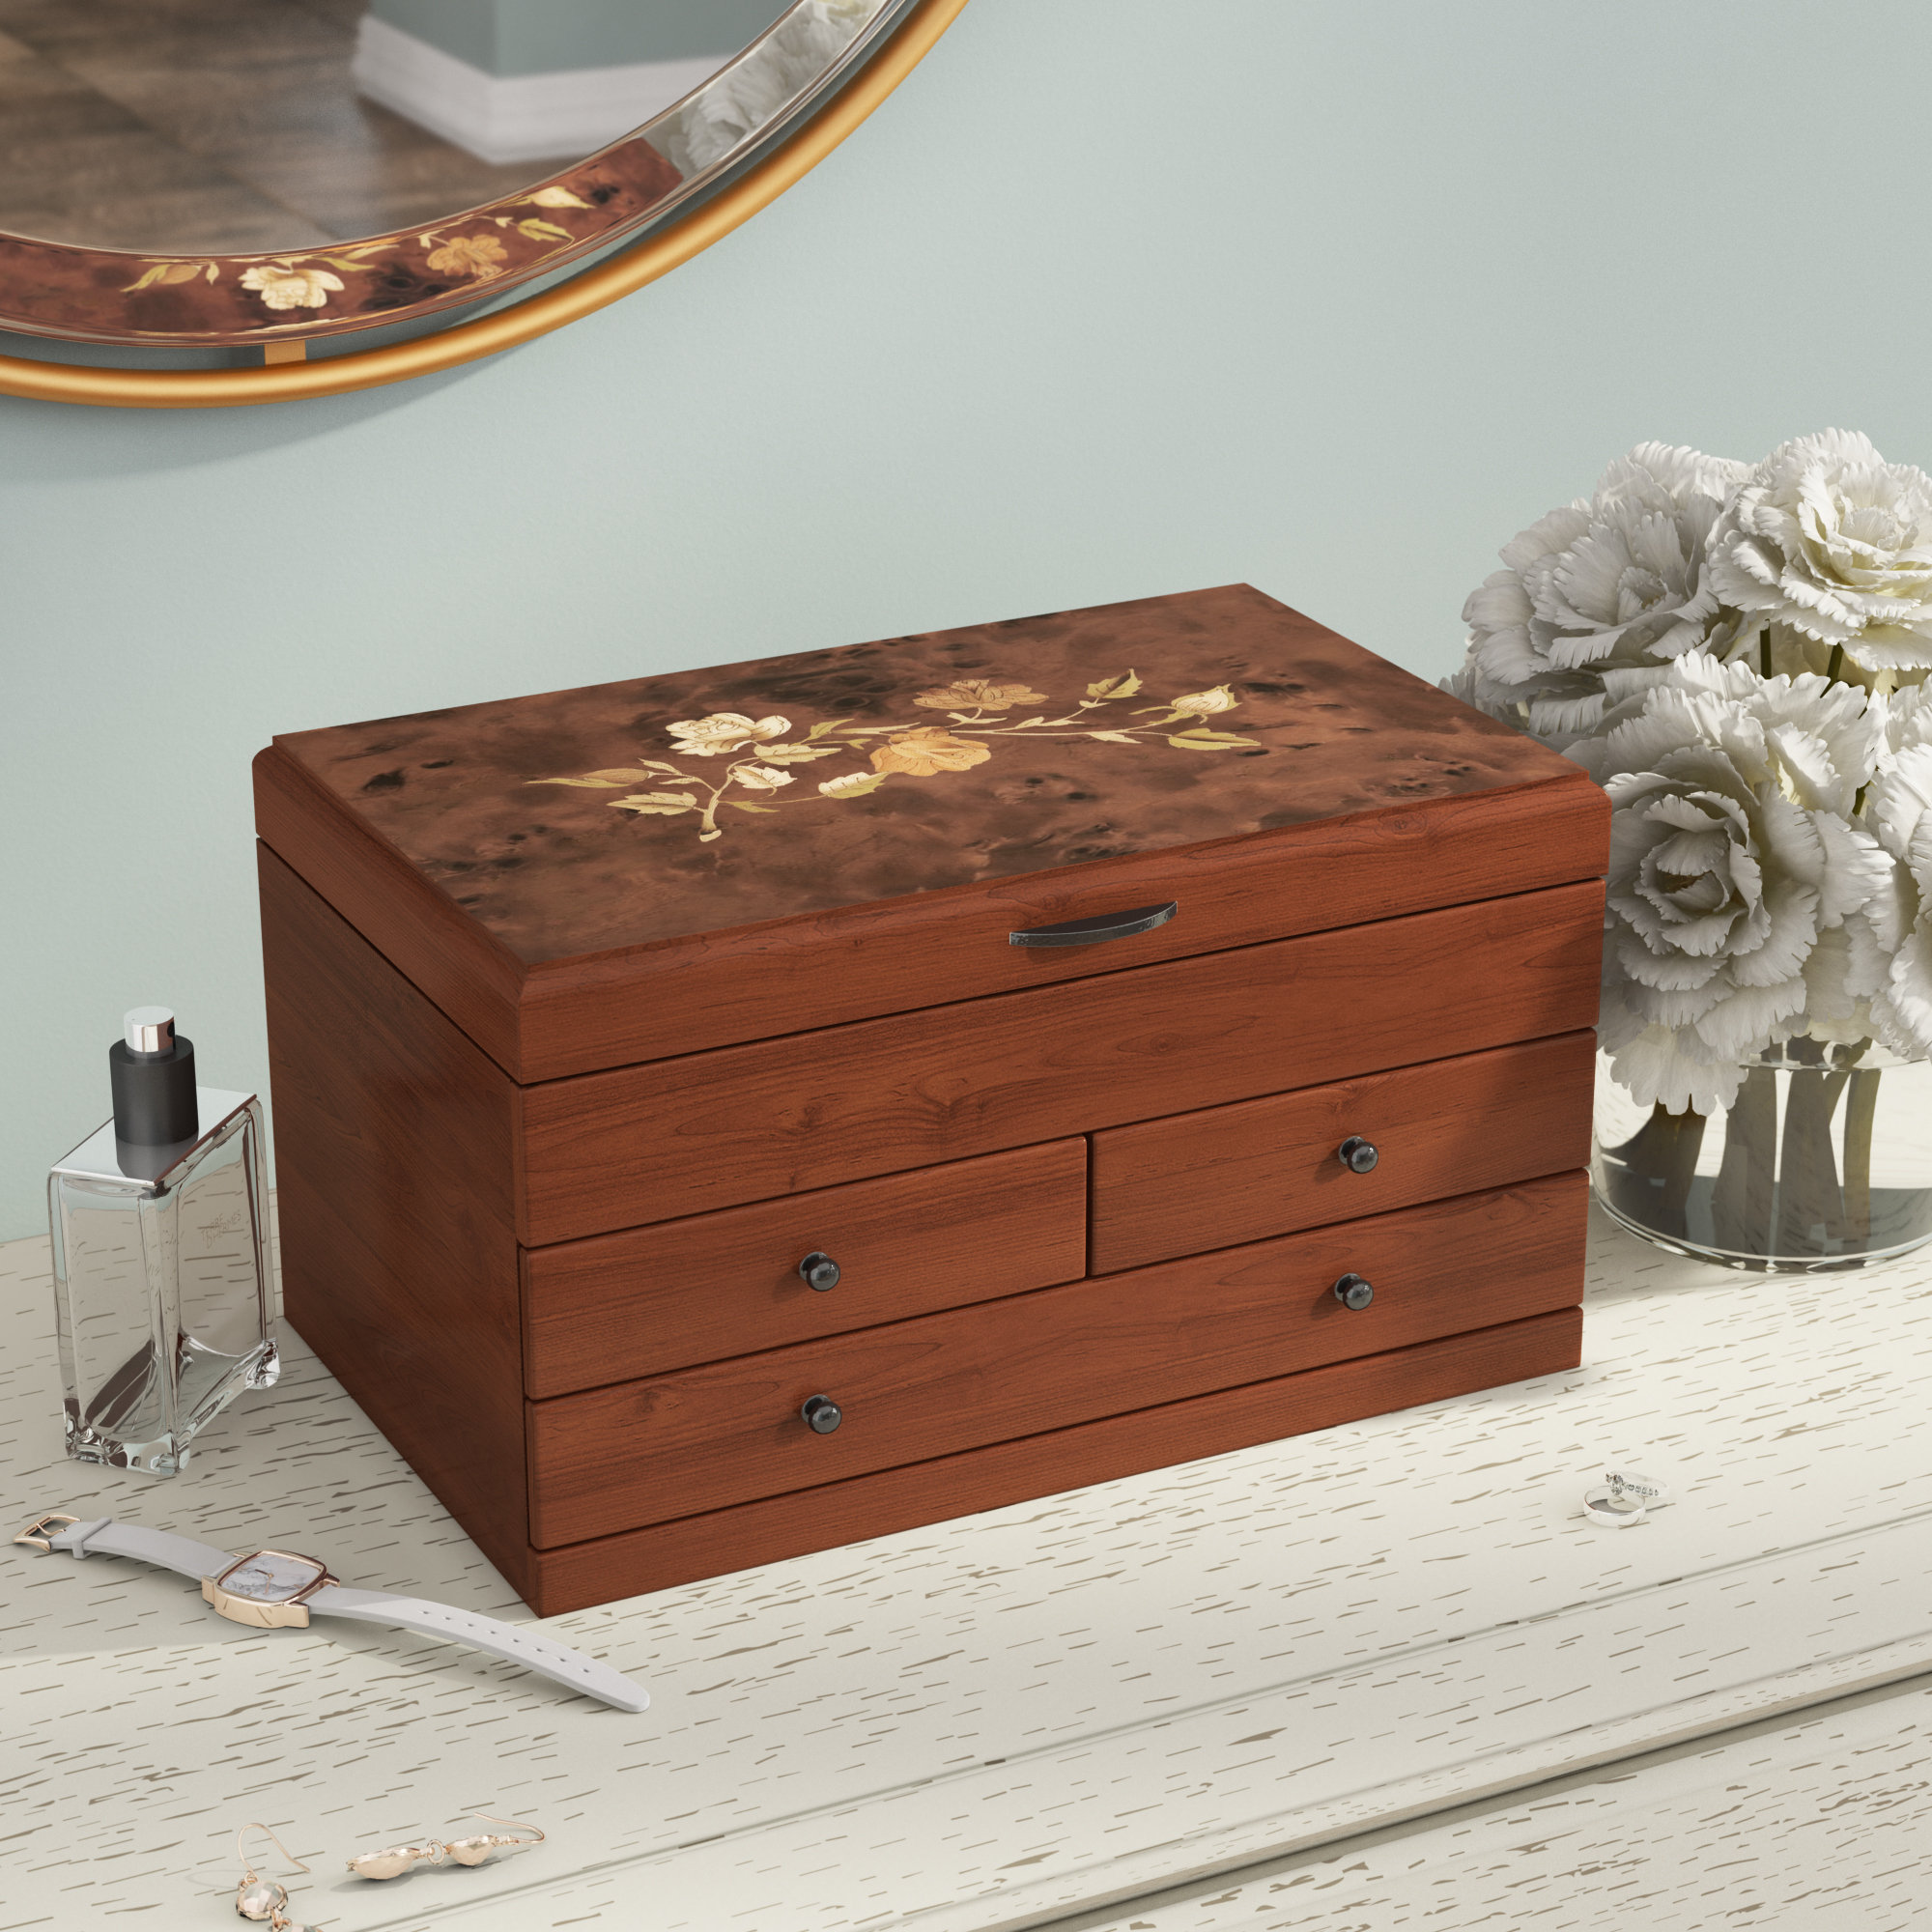 Details about   Wooden Jewelry Storage Box Vintage Delicate Wooden Jewelry Necklace Storage Box 